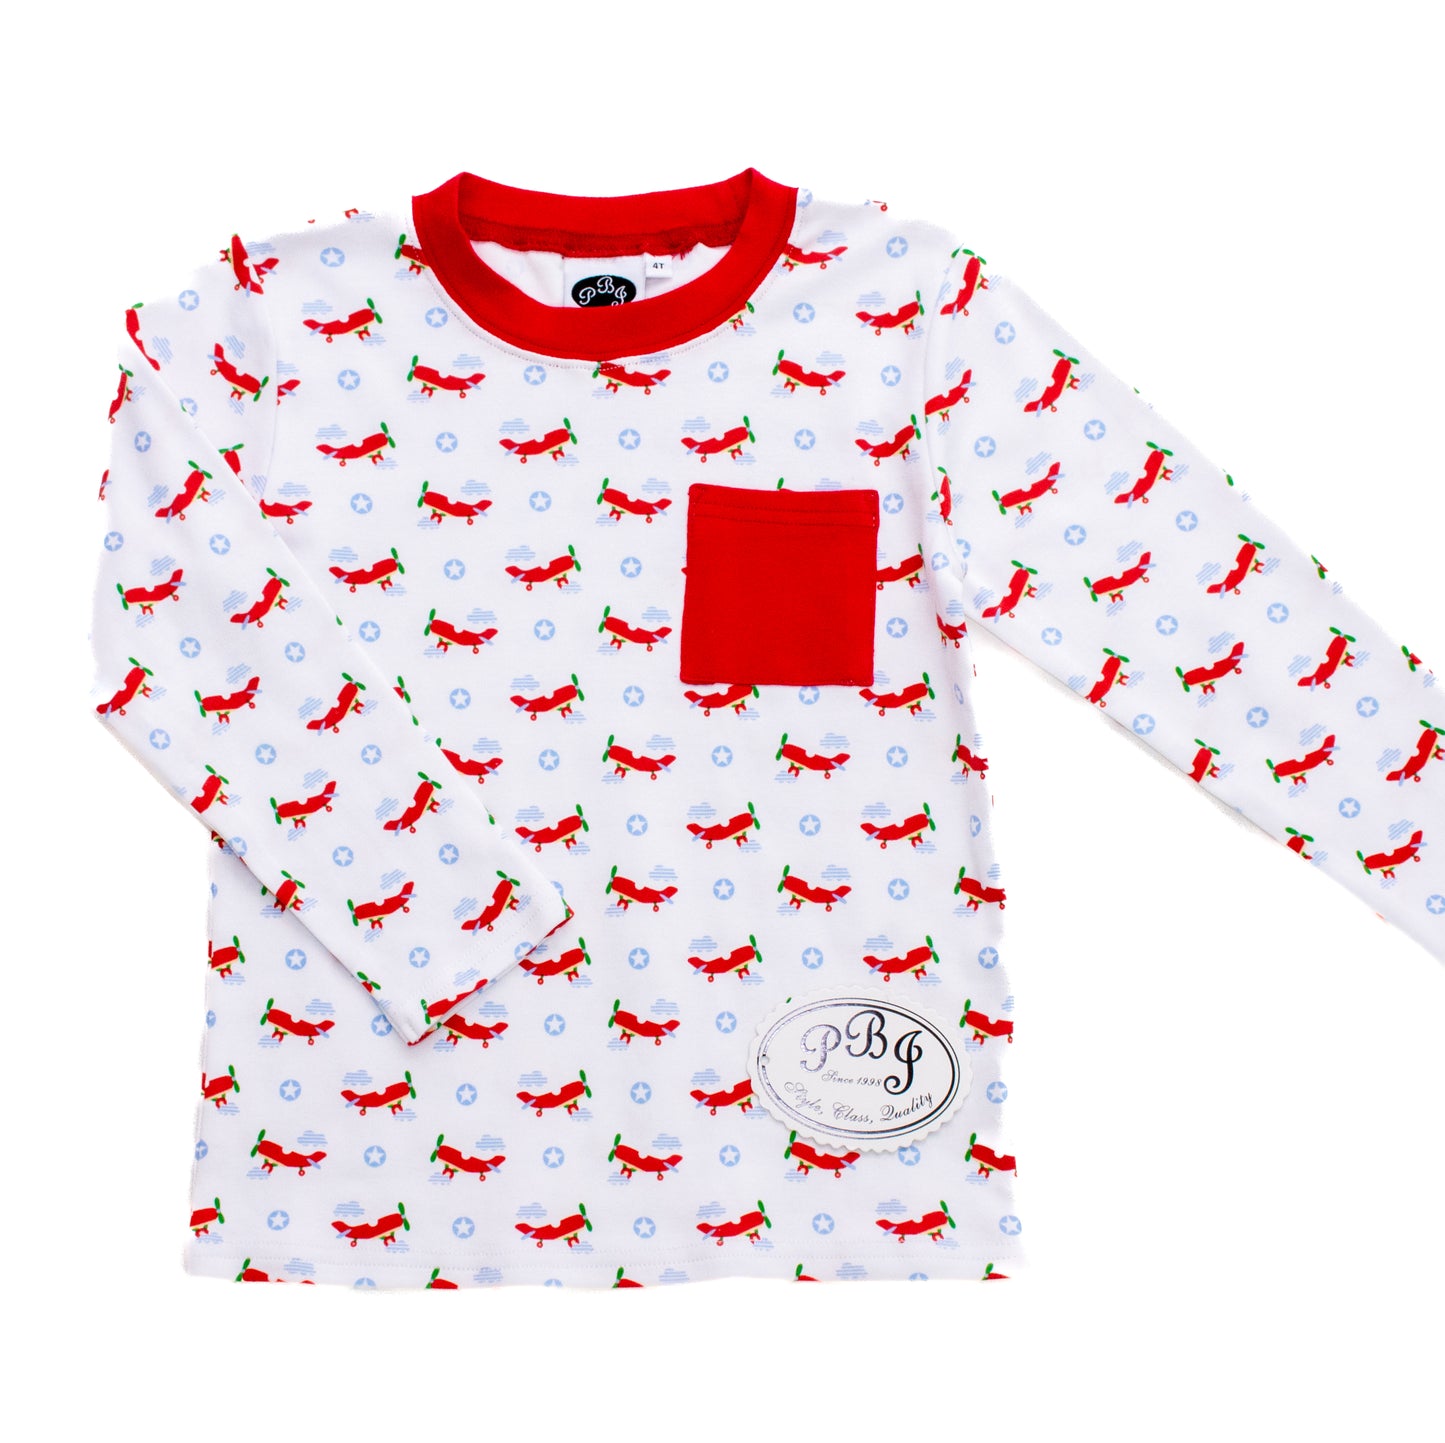 LS Pocket Shirt Airplanes with Red*